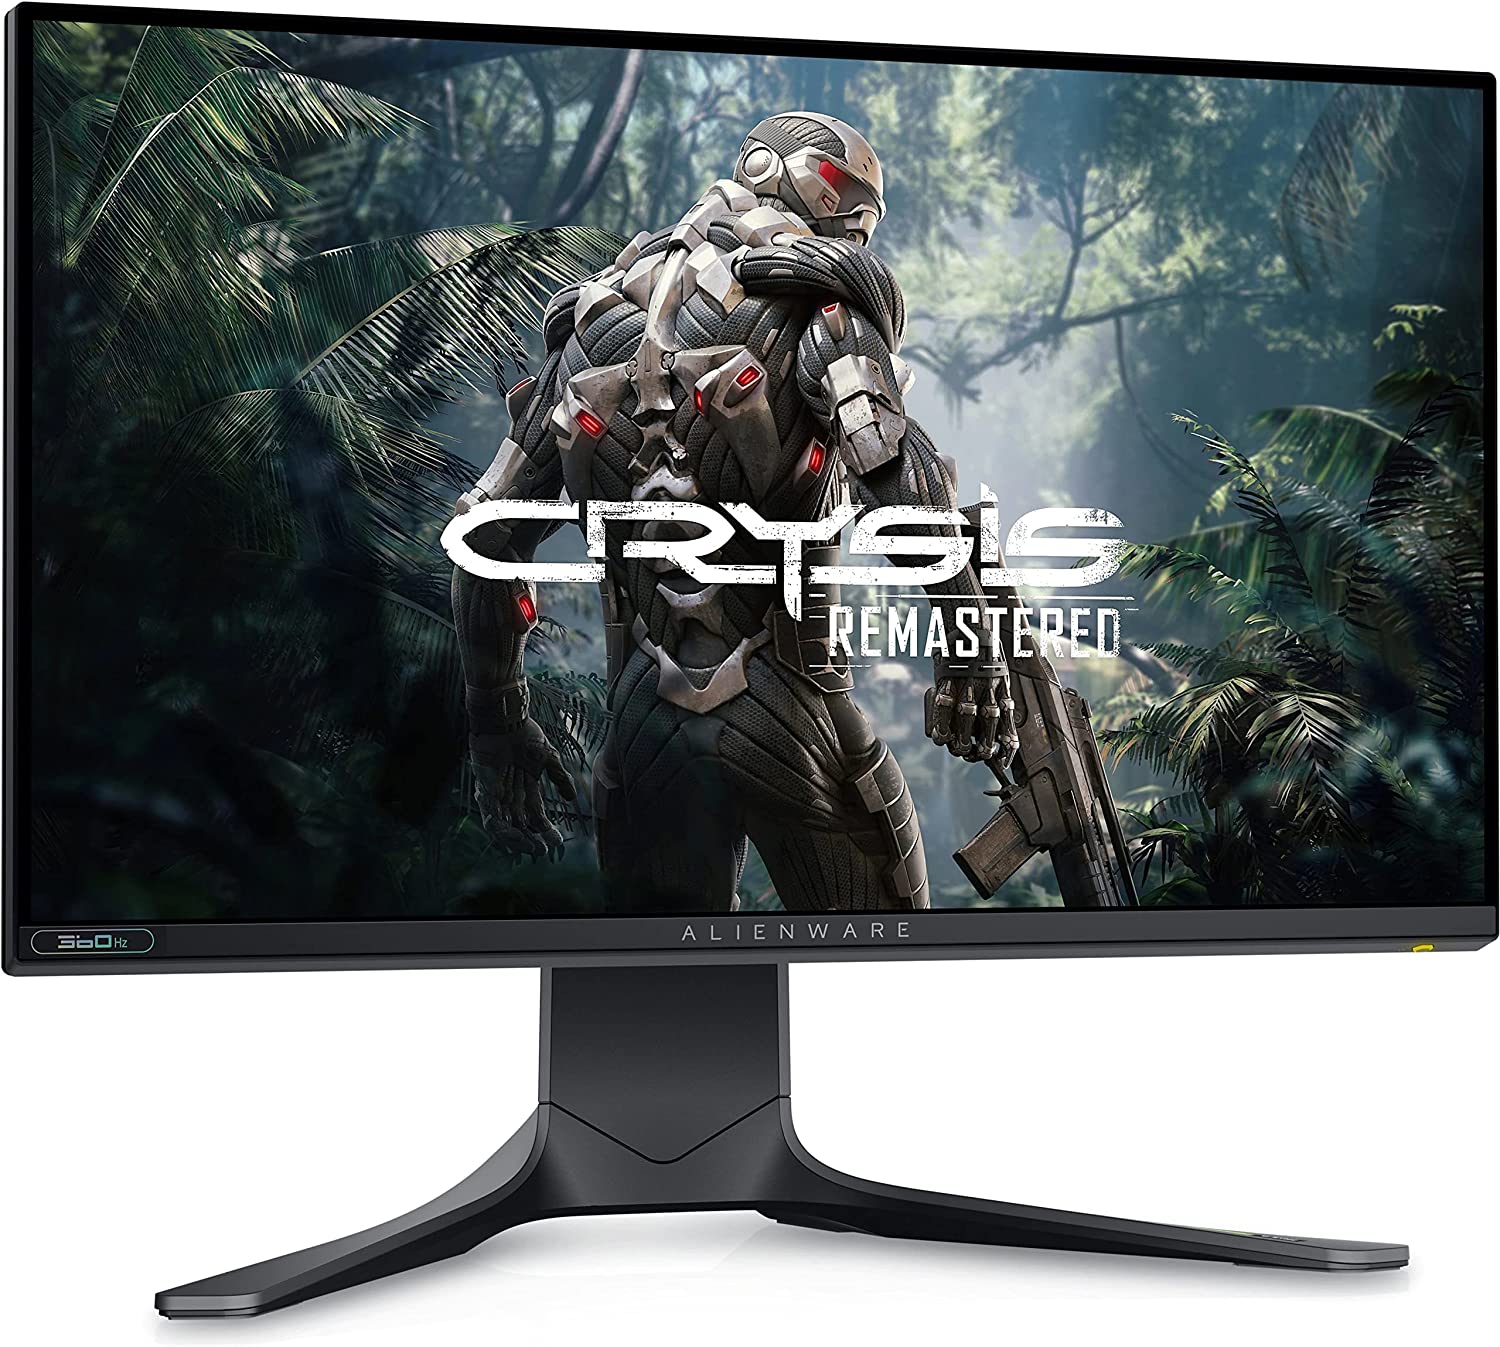 Alienware 360Hz Gaming Monitor 24.5 Inch FHD (Full HD 1920 x 1080p), NVIDIA G-SYNC Certified, 100mm x 100mm VESA Mounting Support, Dark Side of The Moon